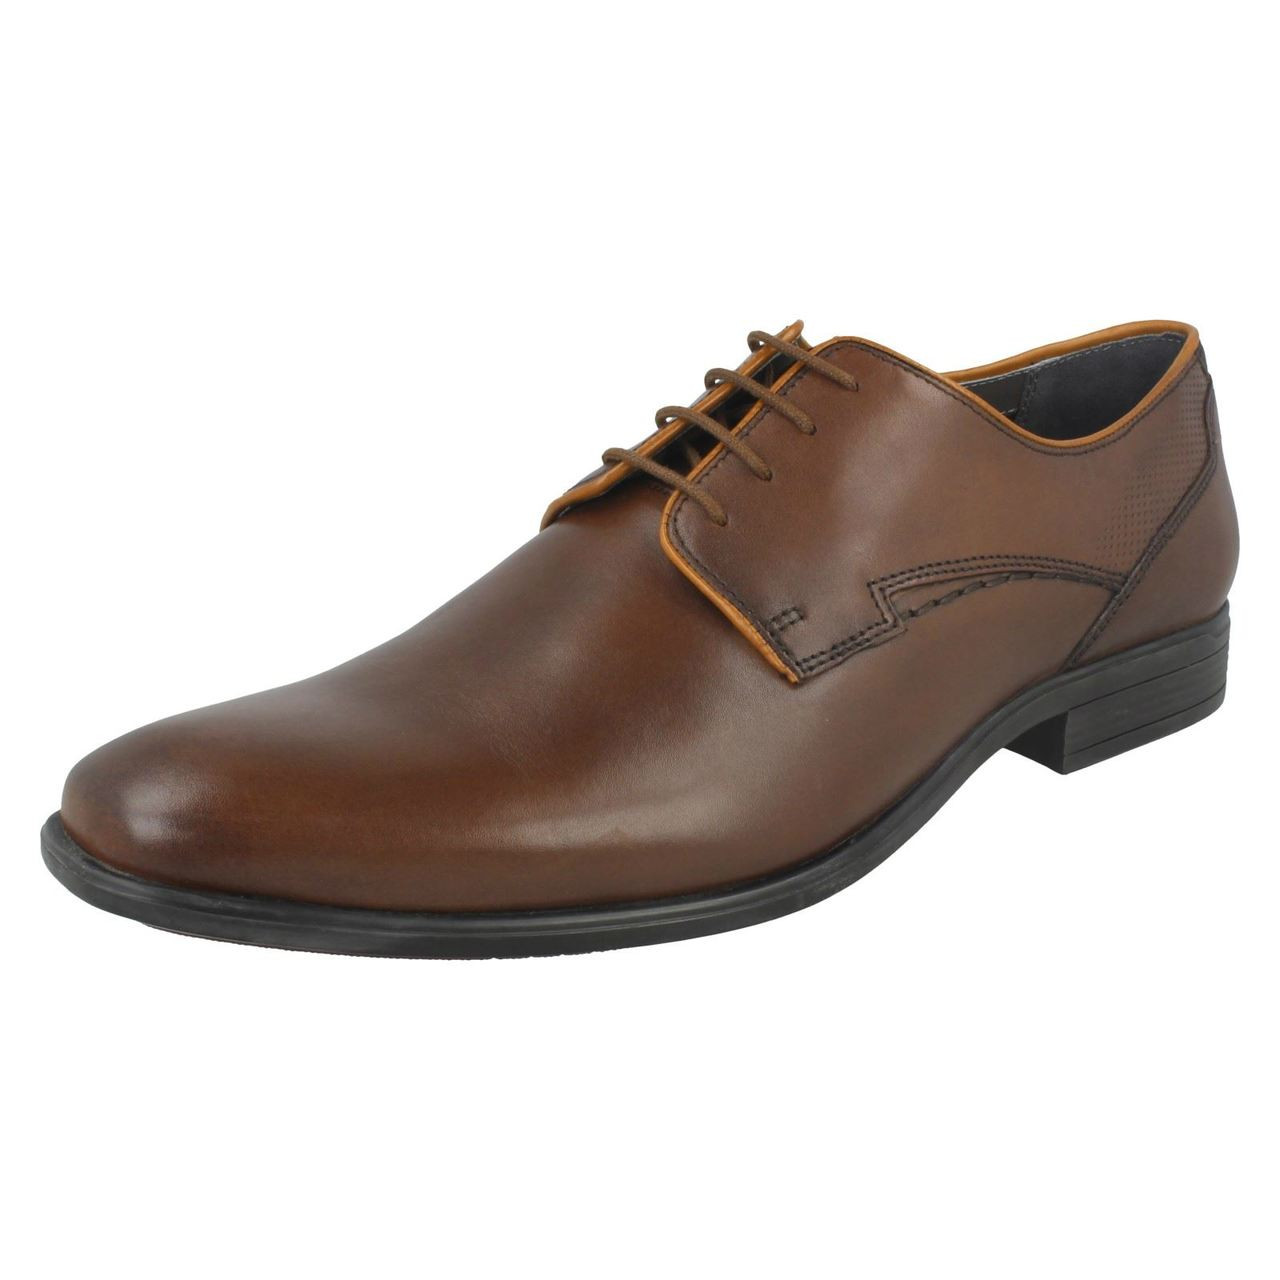 hush puppies men's leather formal shoes